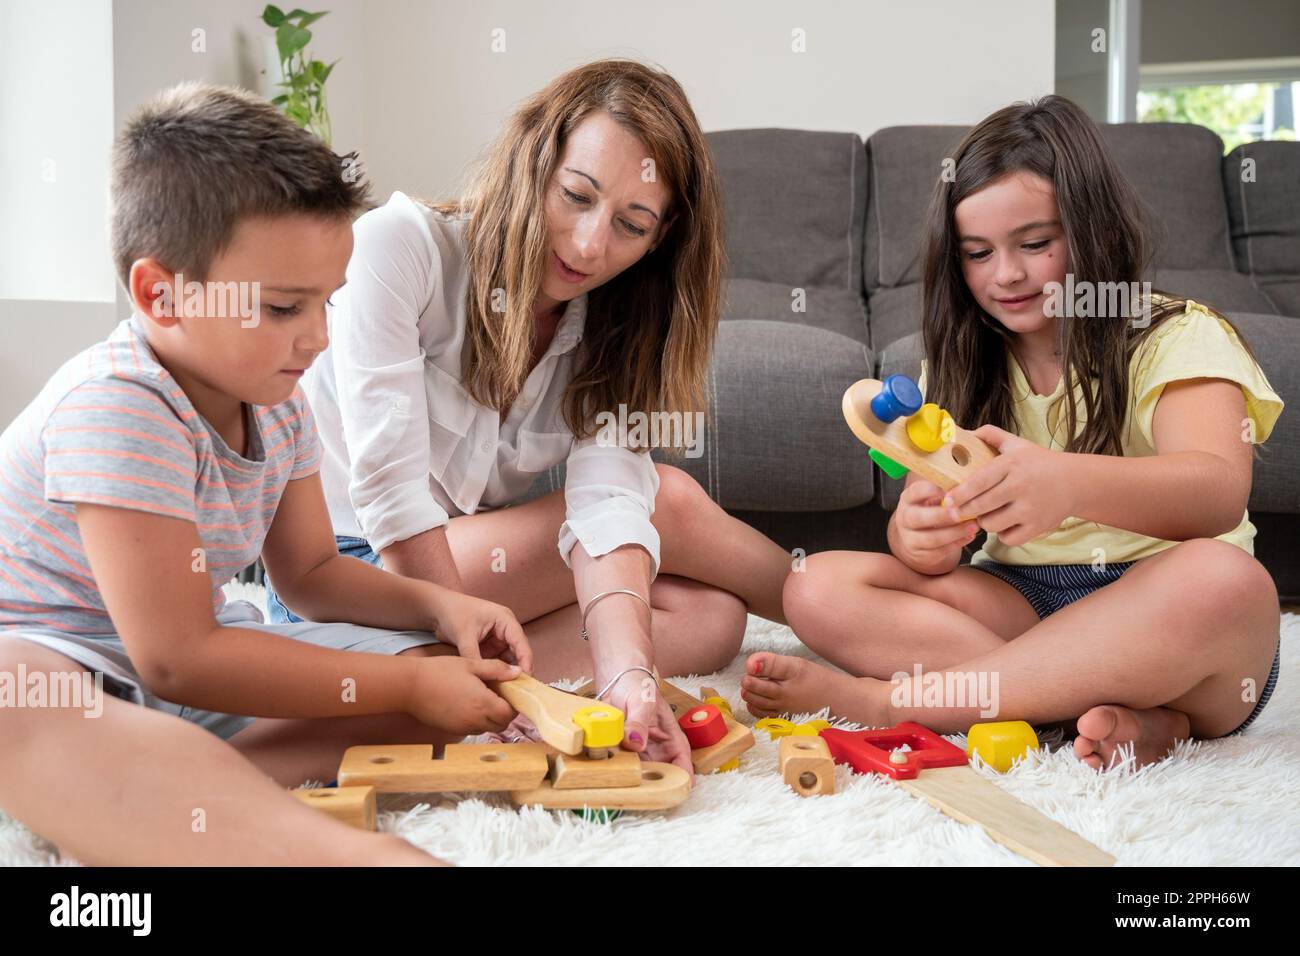 Single mother playing with her kids at home. Stock Photo